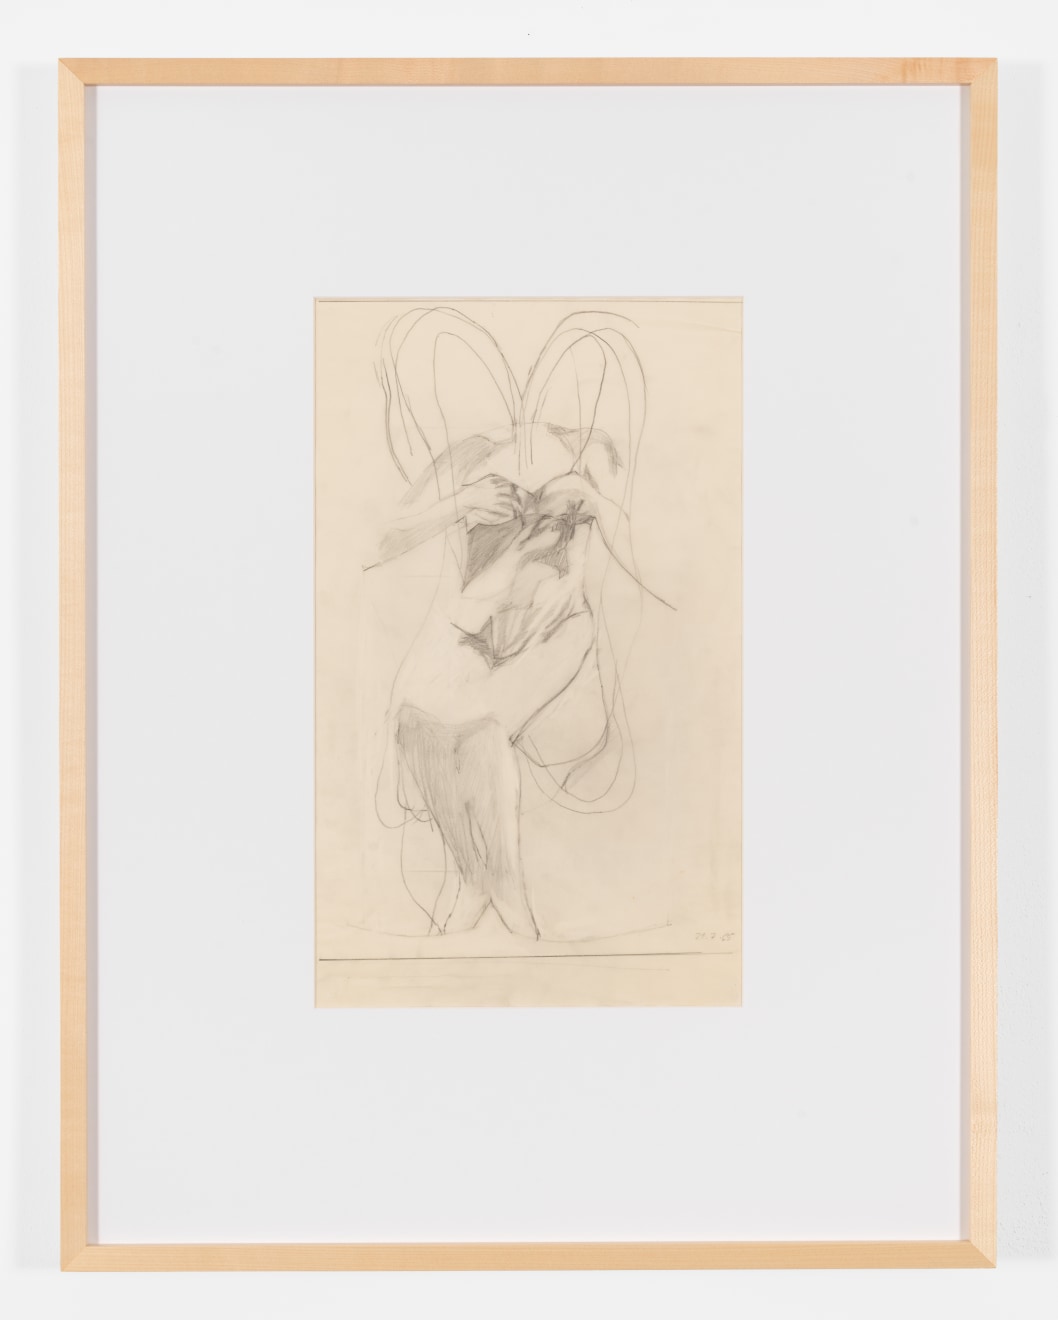 Untitled, 1966, pencil on paper